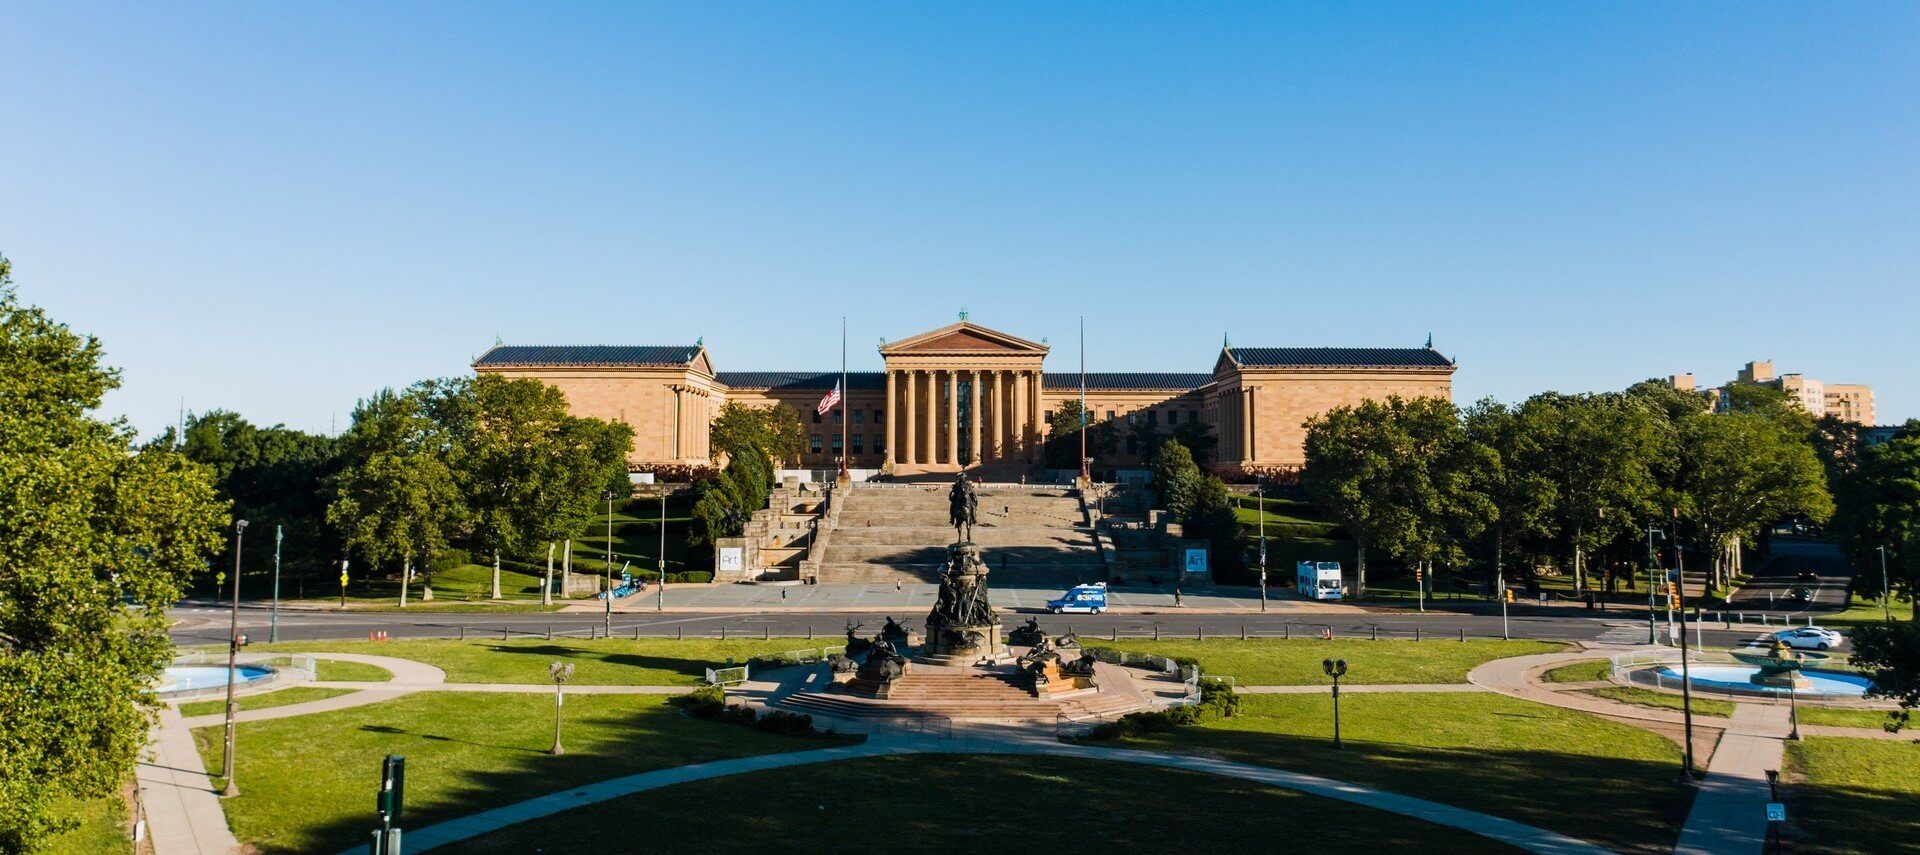 Front view of an expansive museum with columns and staircase in front of grassy area